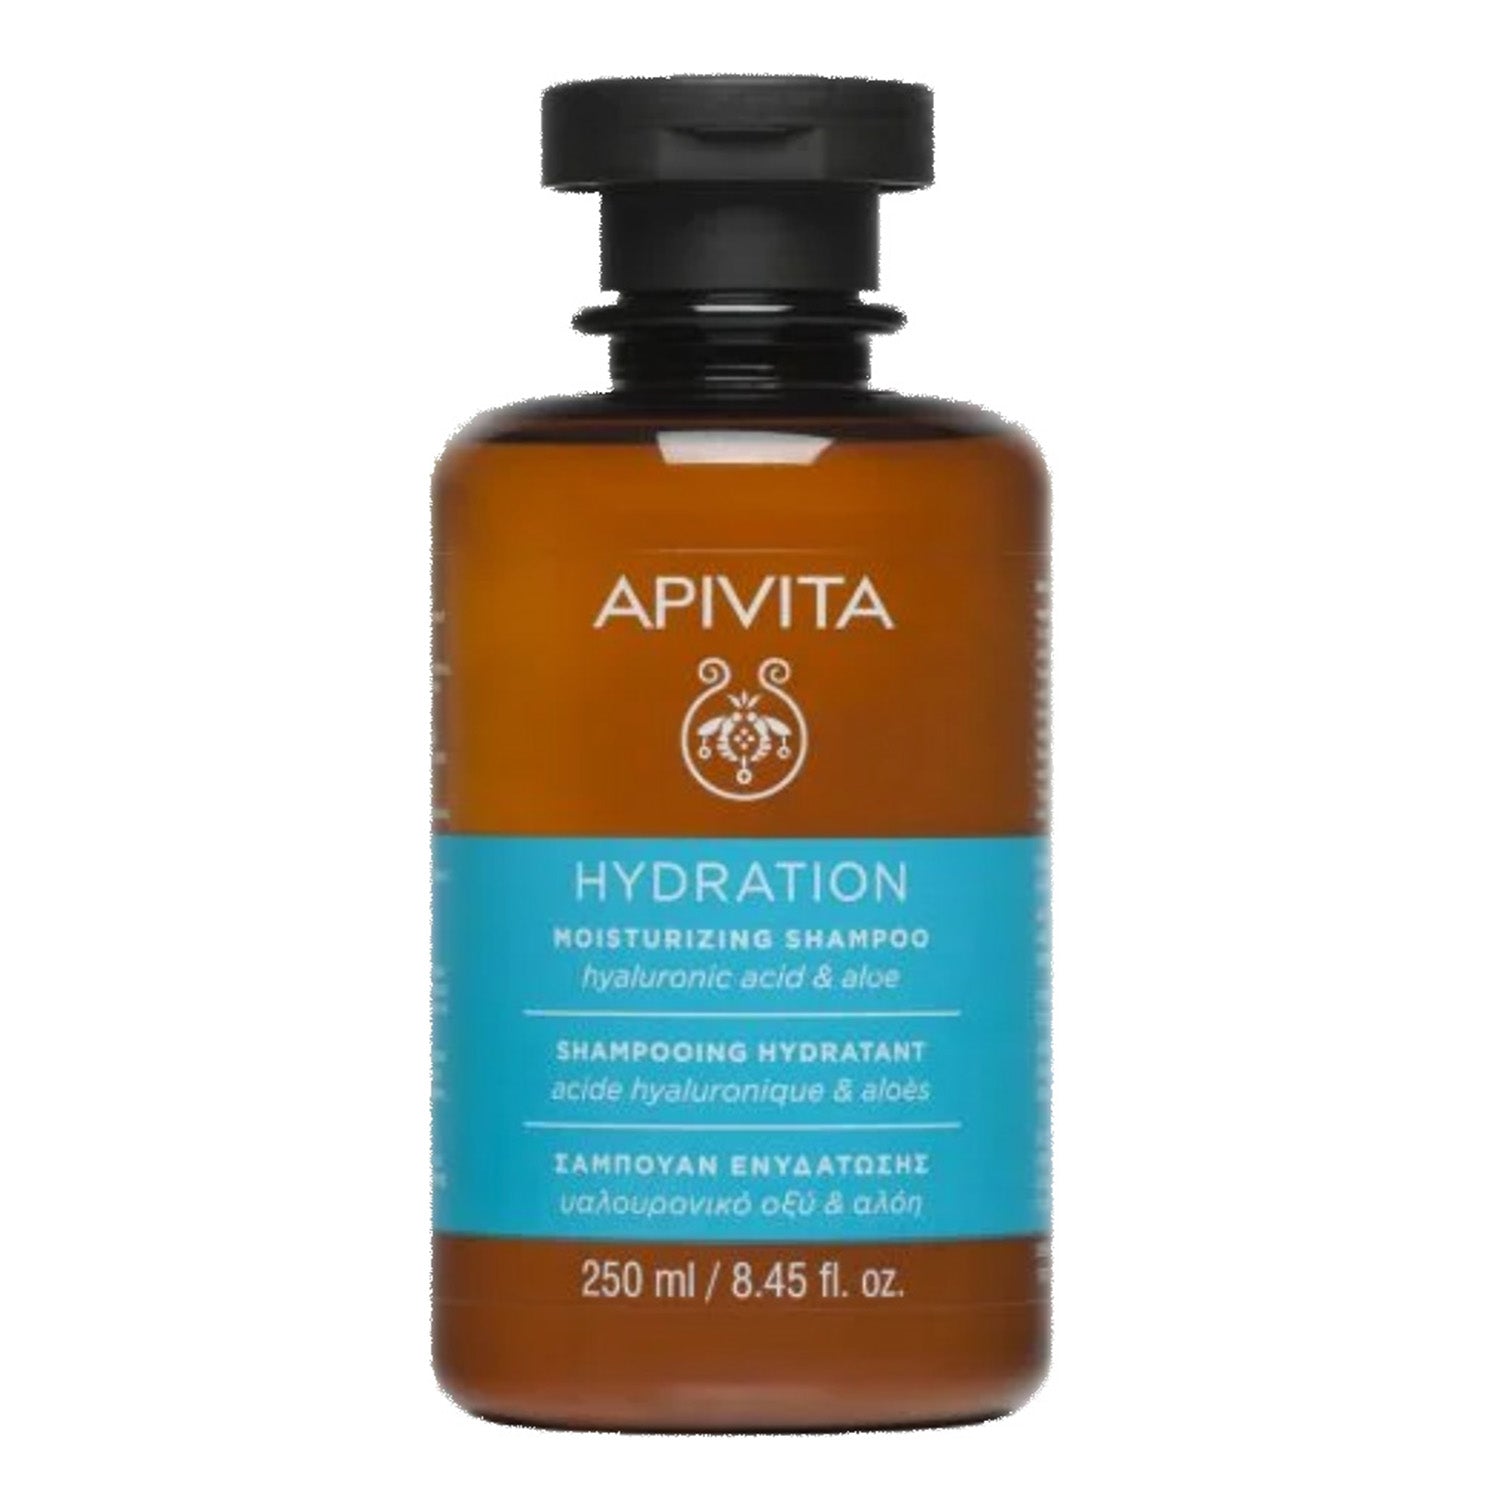 Apivita Hydration & Moisturising Shampoo with Hyaluronic is a  luxurious shampoo with 86% natural origin ingredients, this formula gently cleanses while maintaining the scalp's moisture. 